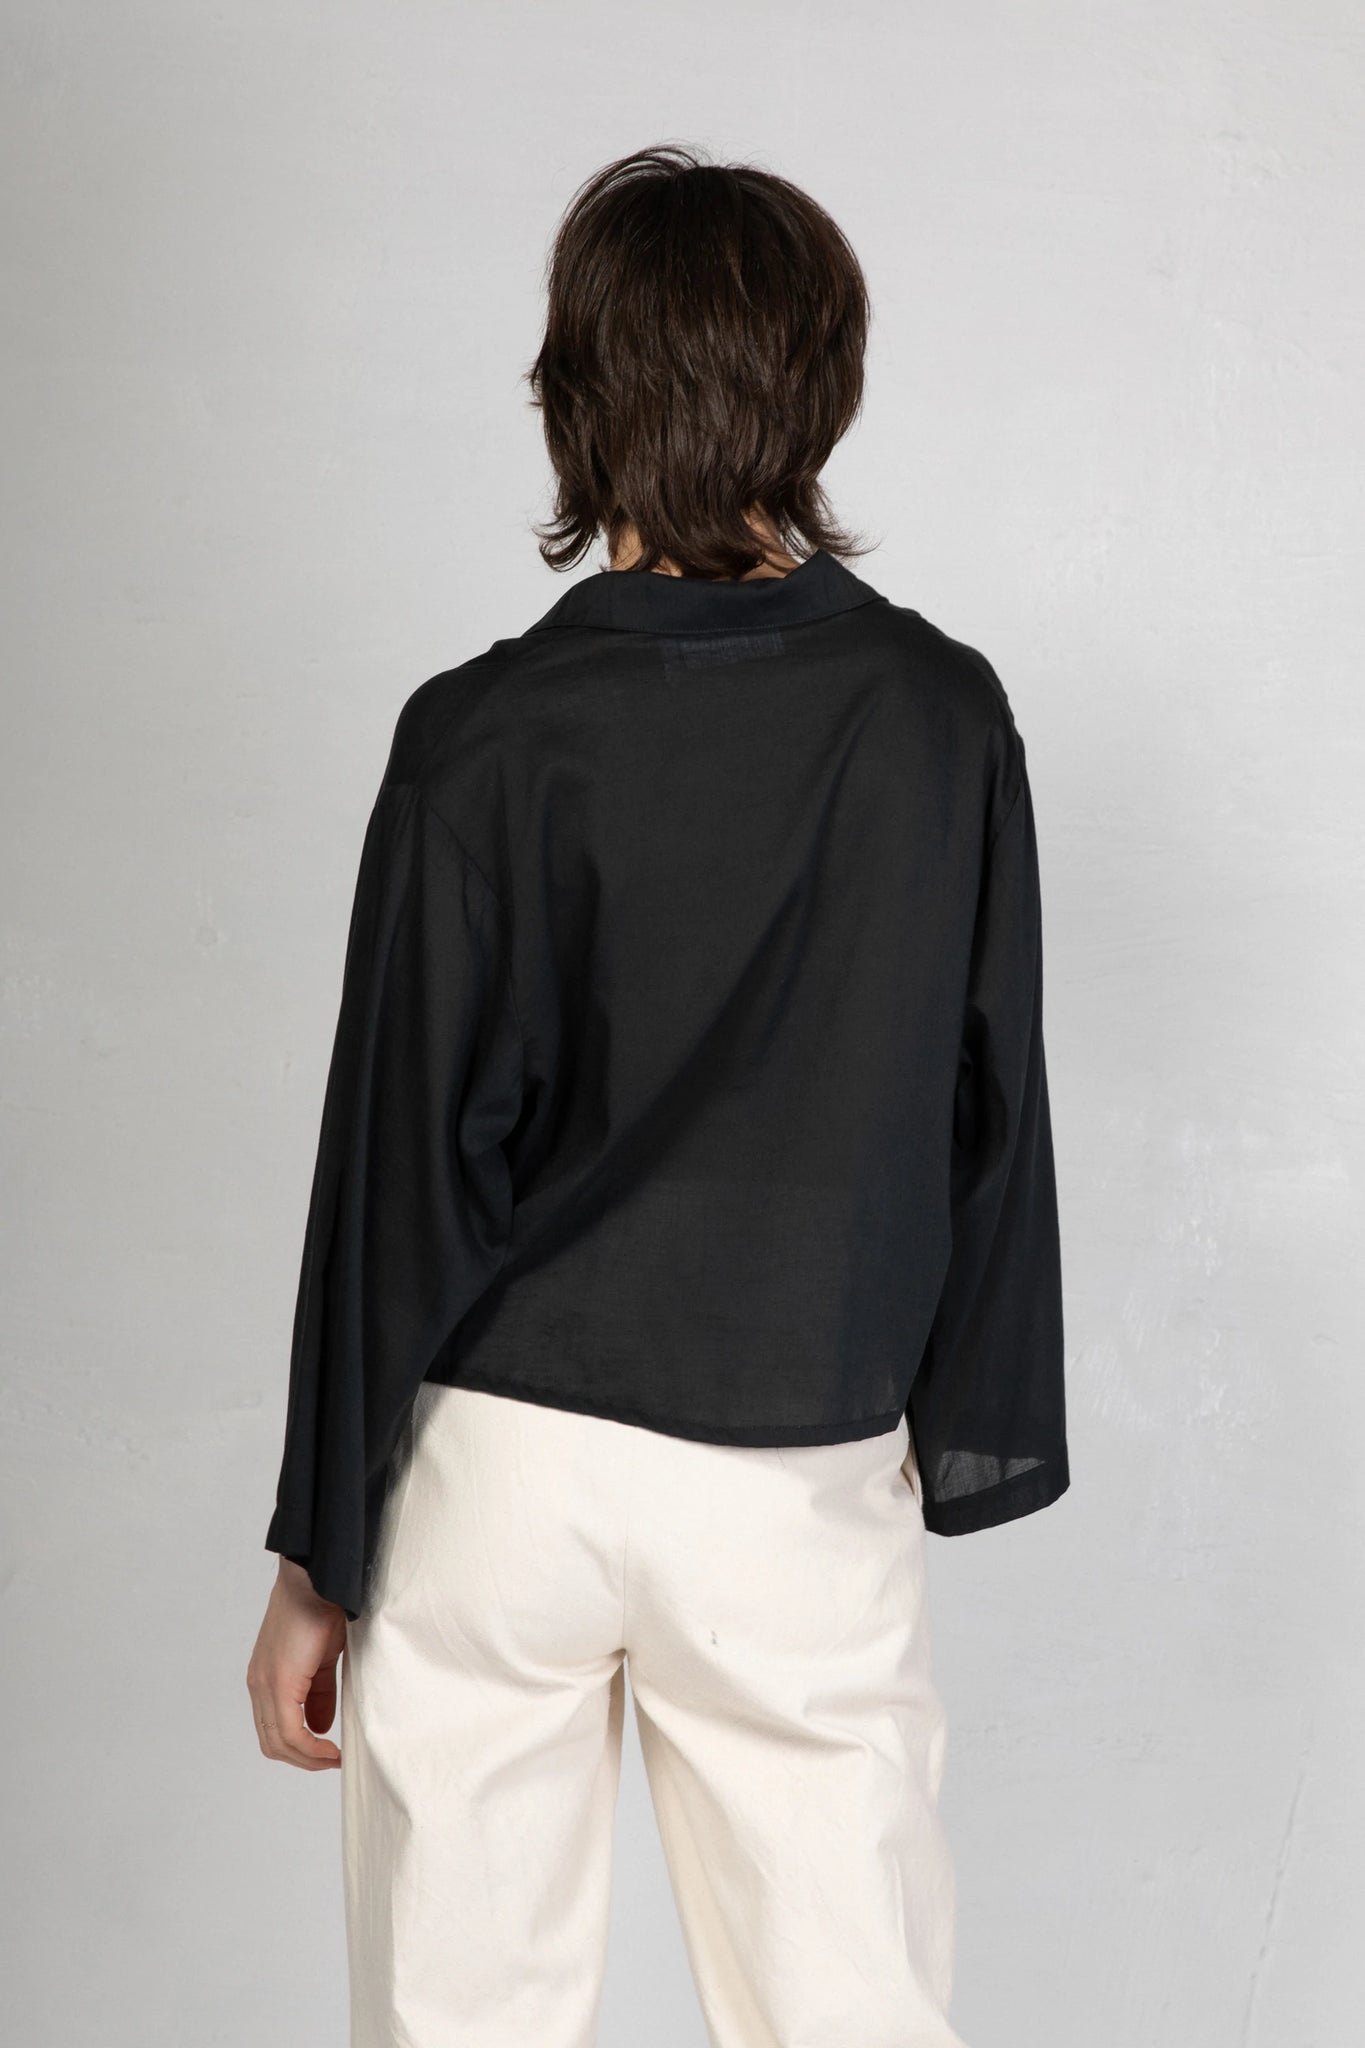 Cropped shirt Jil sun in black by Can Pep Rey